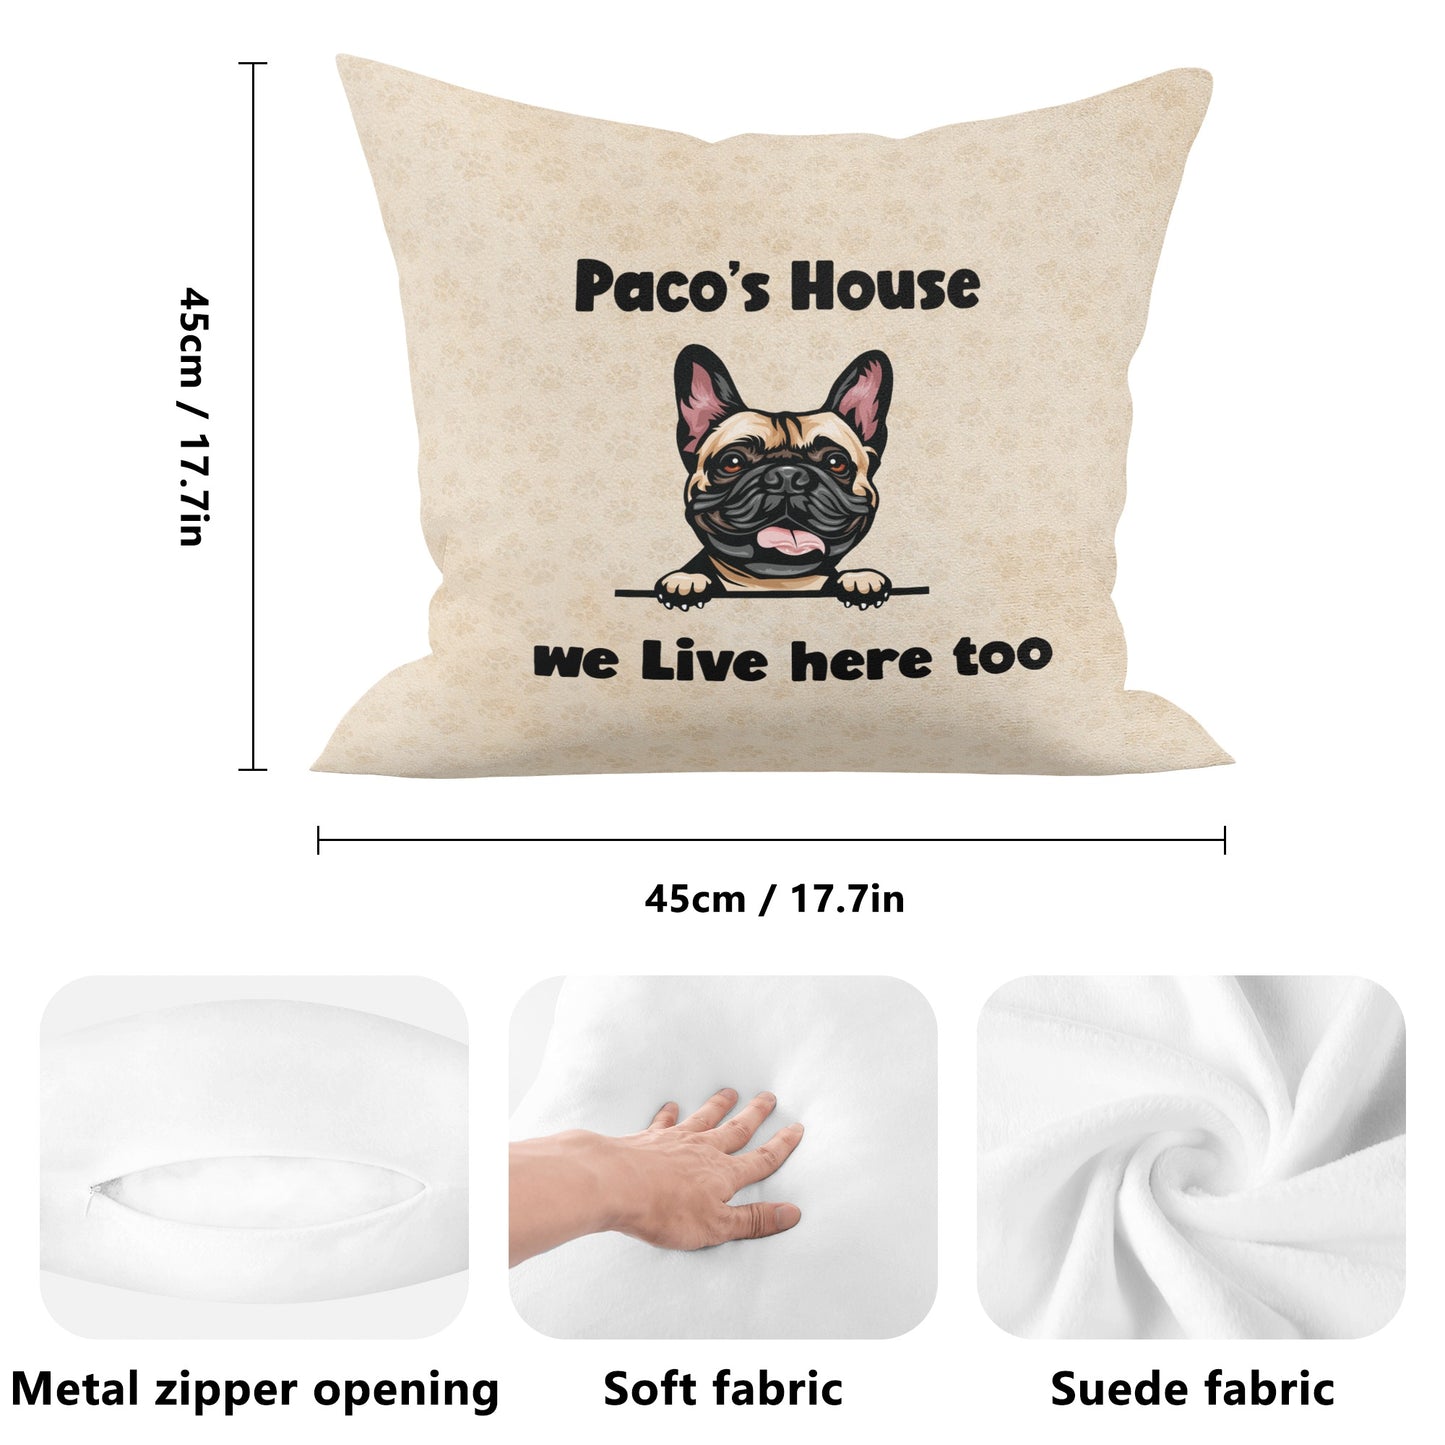 Frenchies house - Custom Pillow